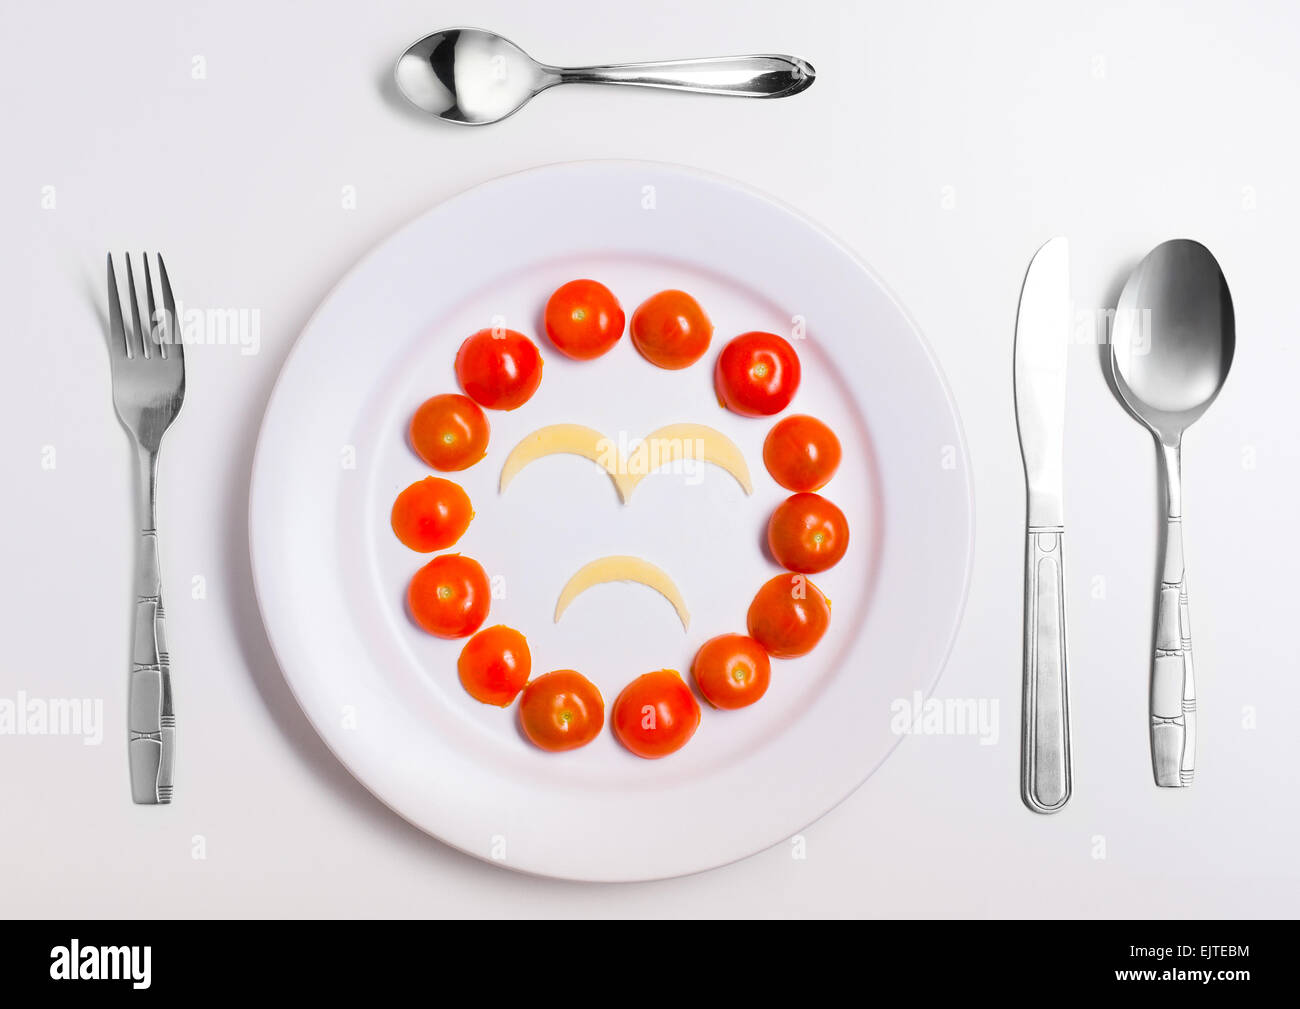 sad emoticon food, made from cheese and tomatoes, on a plate with cutlery, isolated Stock Photo